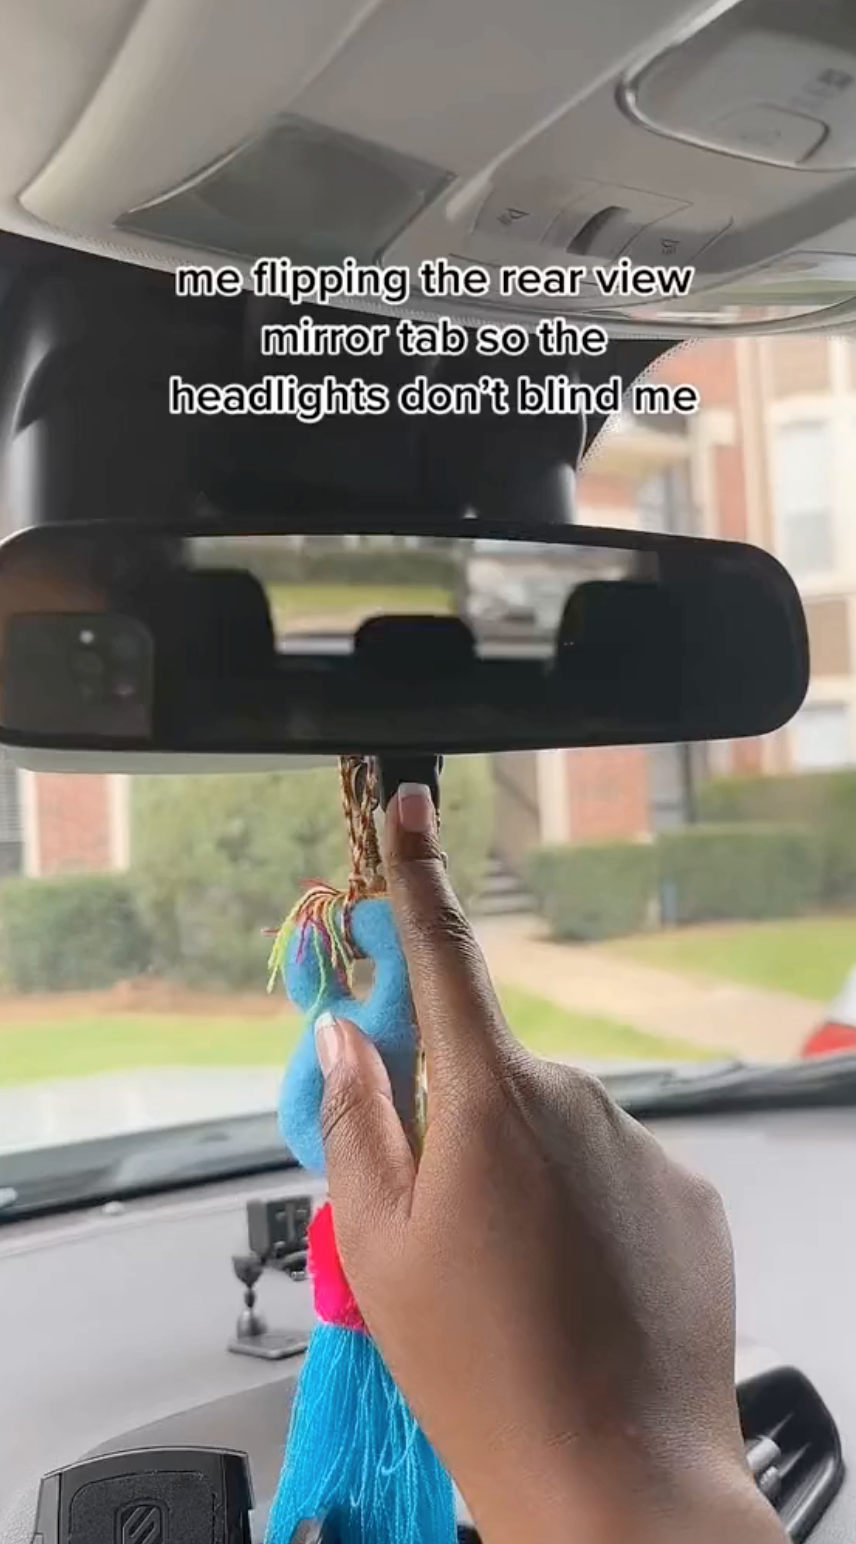 Drivers flabbergasted by 'mystery' button on rear-view mirror